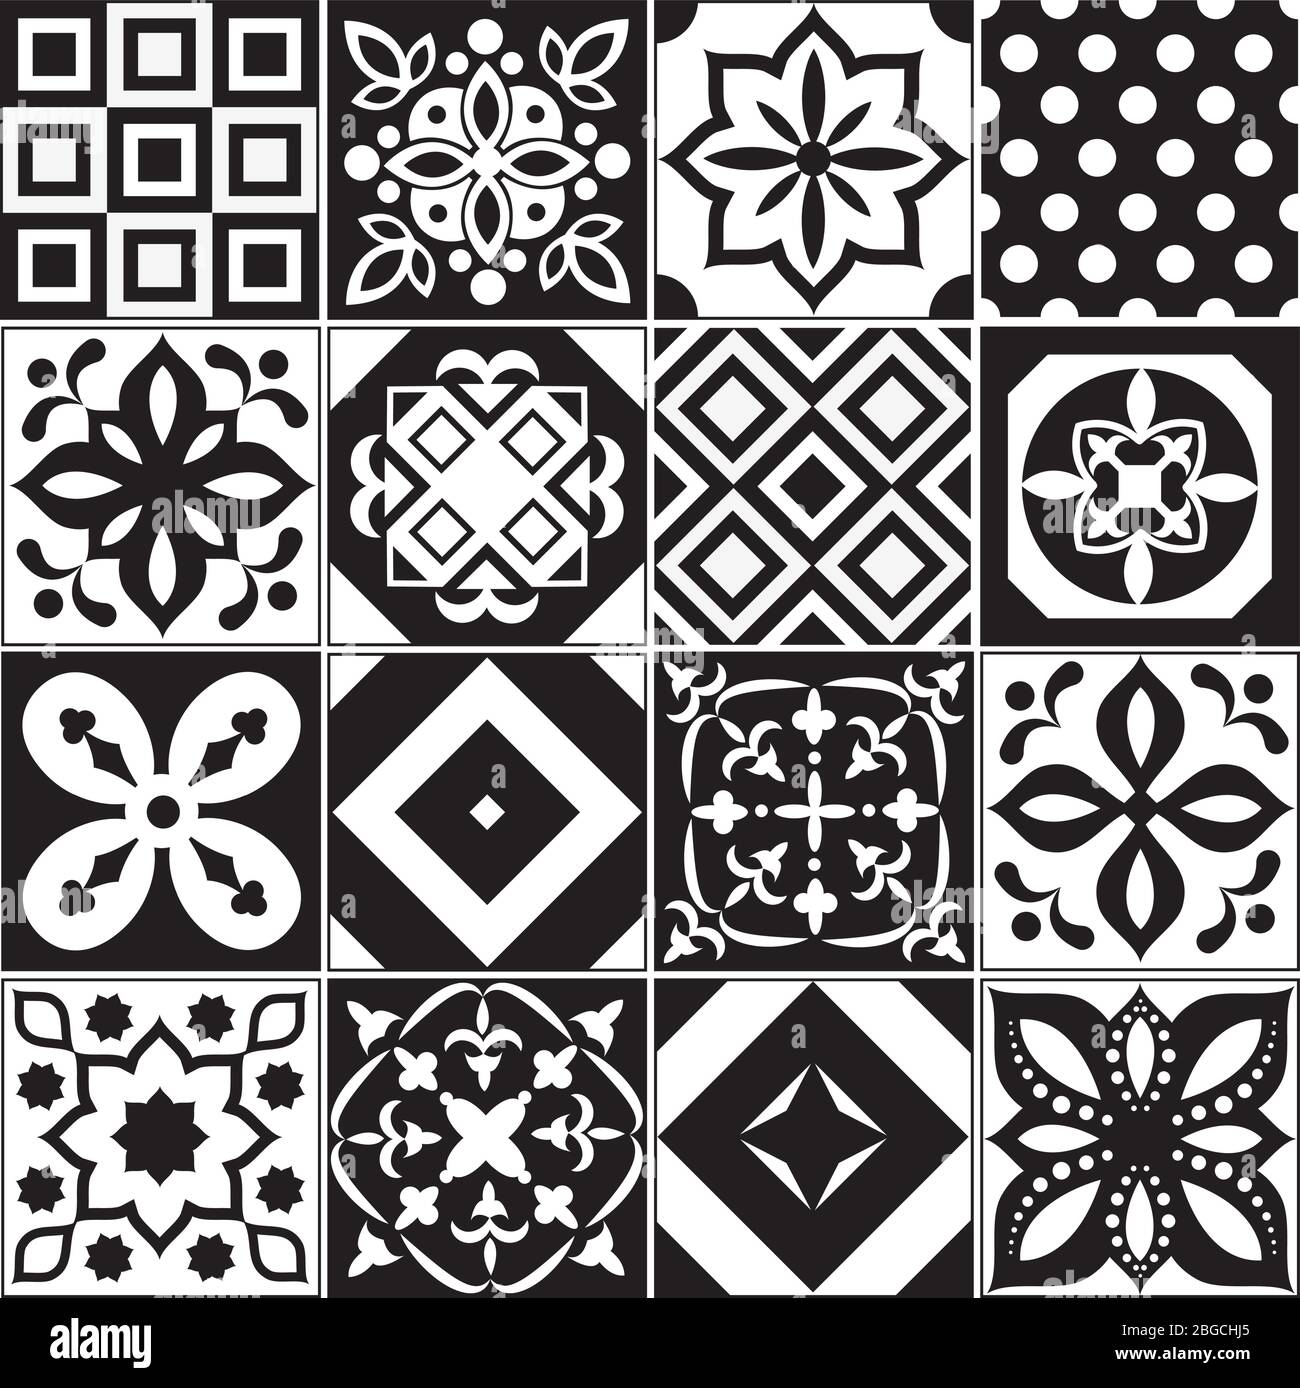 Vintage black and white traditional ceramic floor tile patterns vector collection. Ceramic pattern traditional floor background square illustration Stock Vector